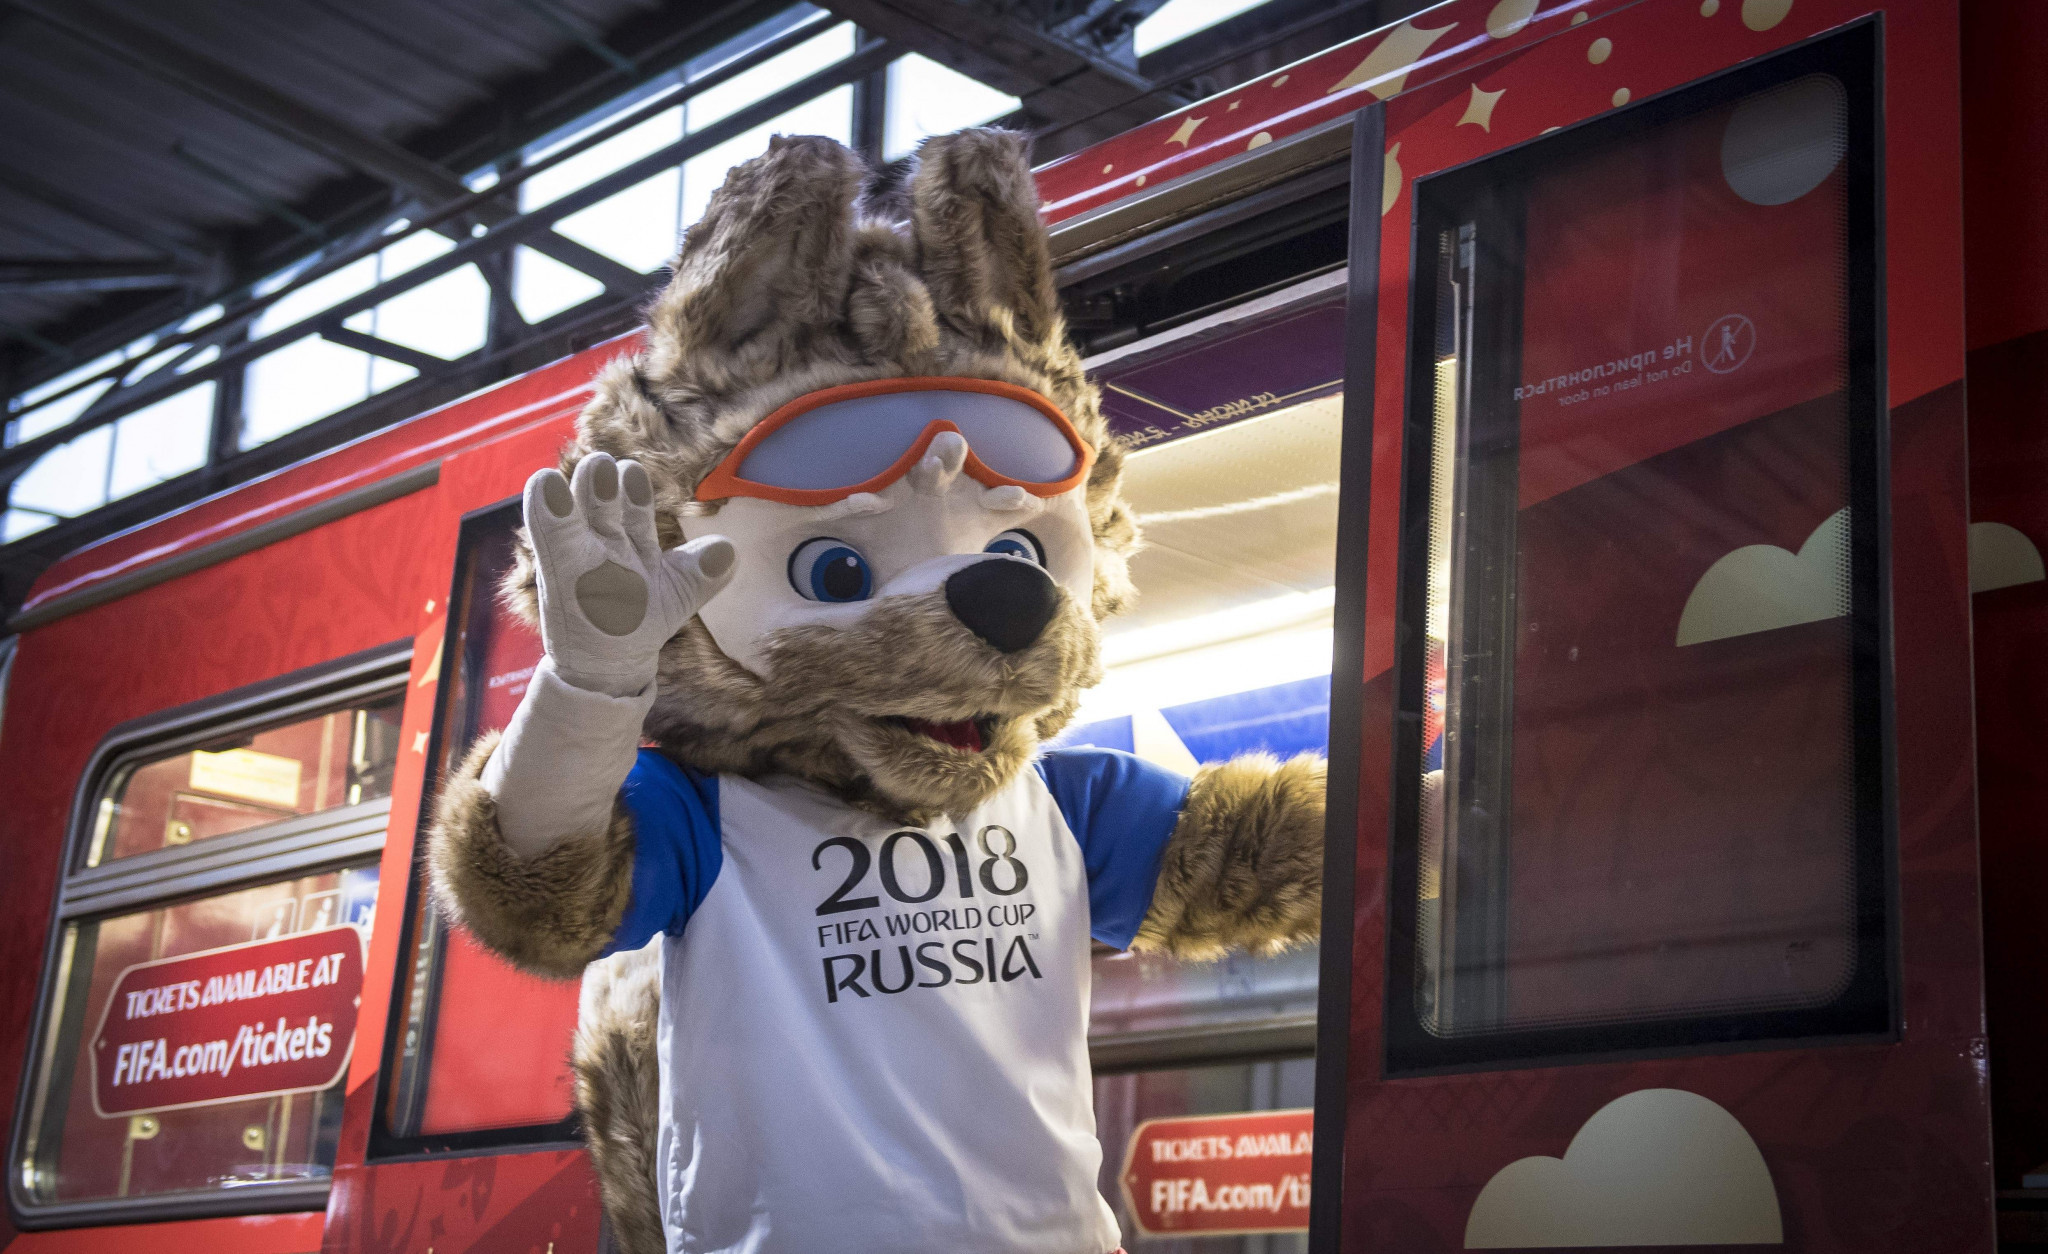 The poster for the 2018 FIFA World Cup in Russia was unveiled on the Moscow Metro today ©Getty Images